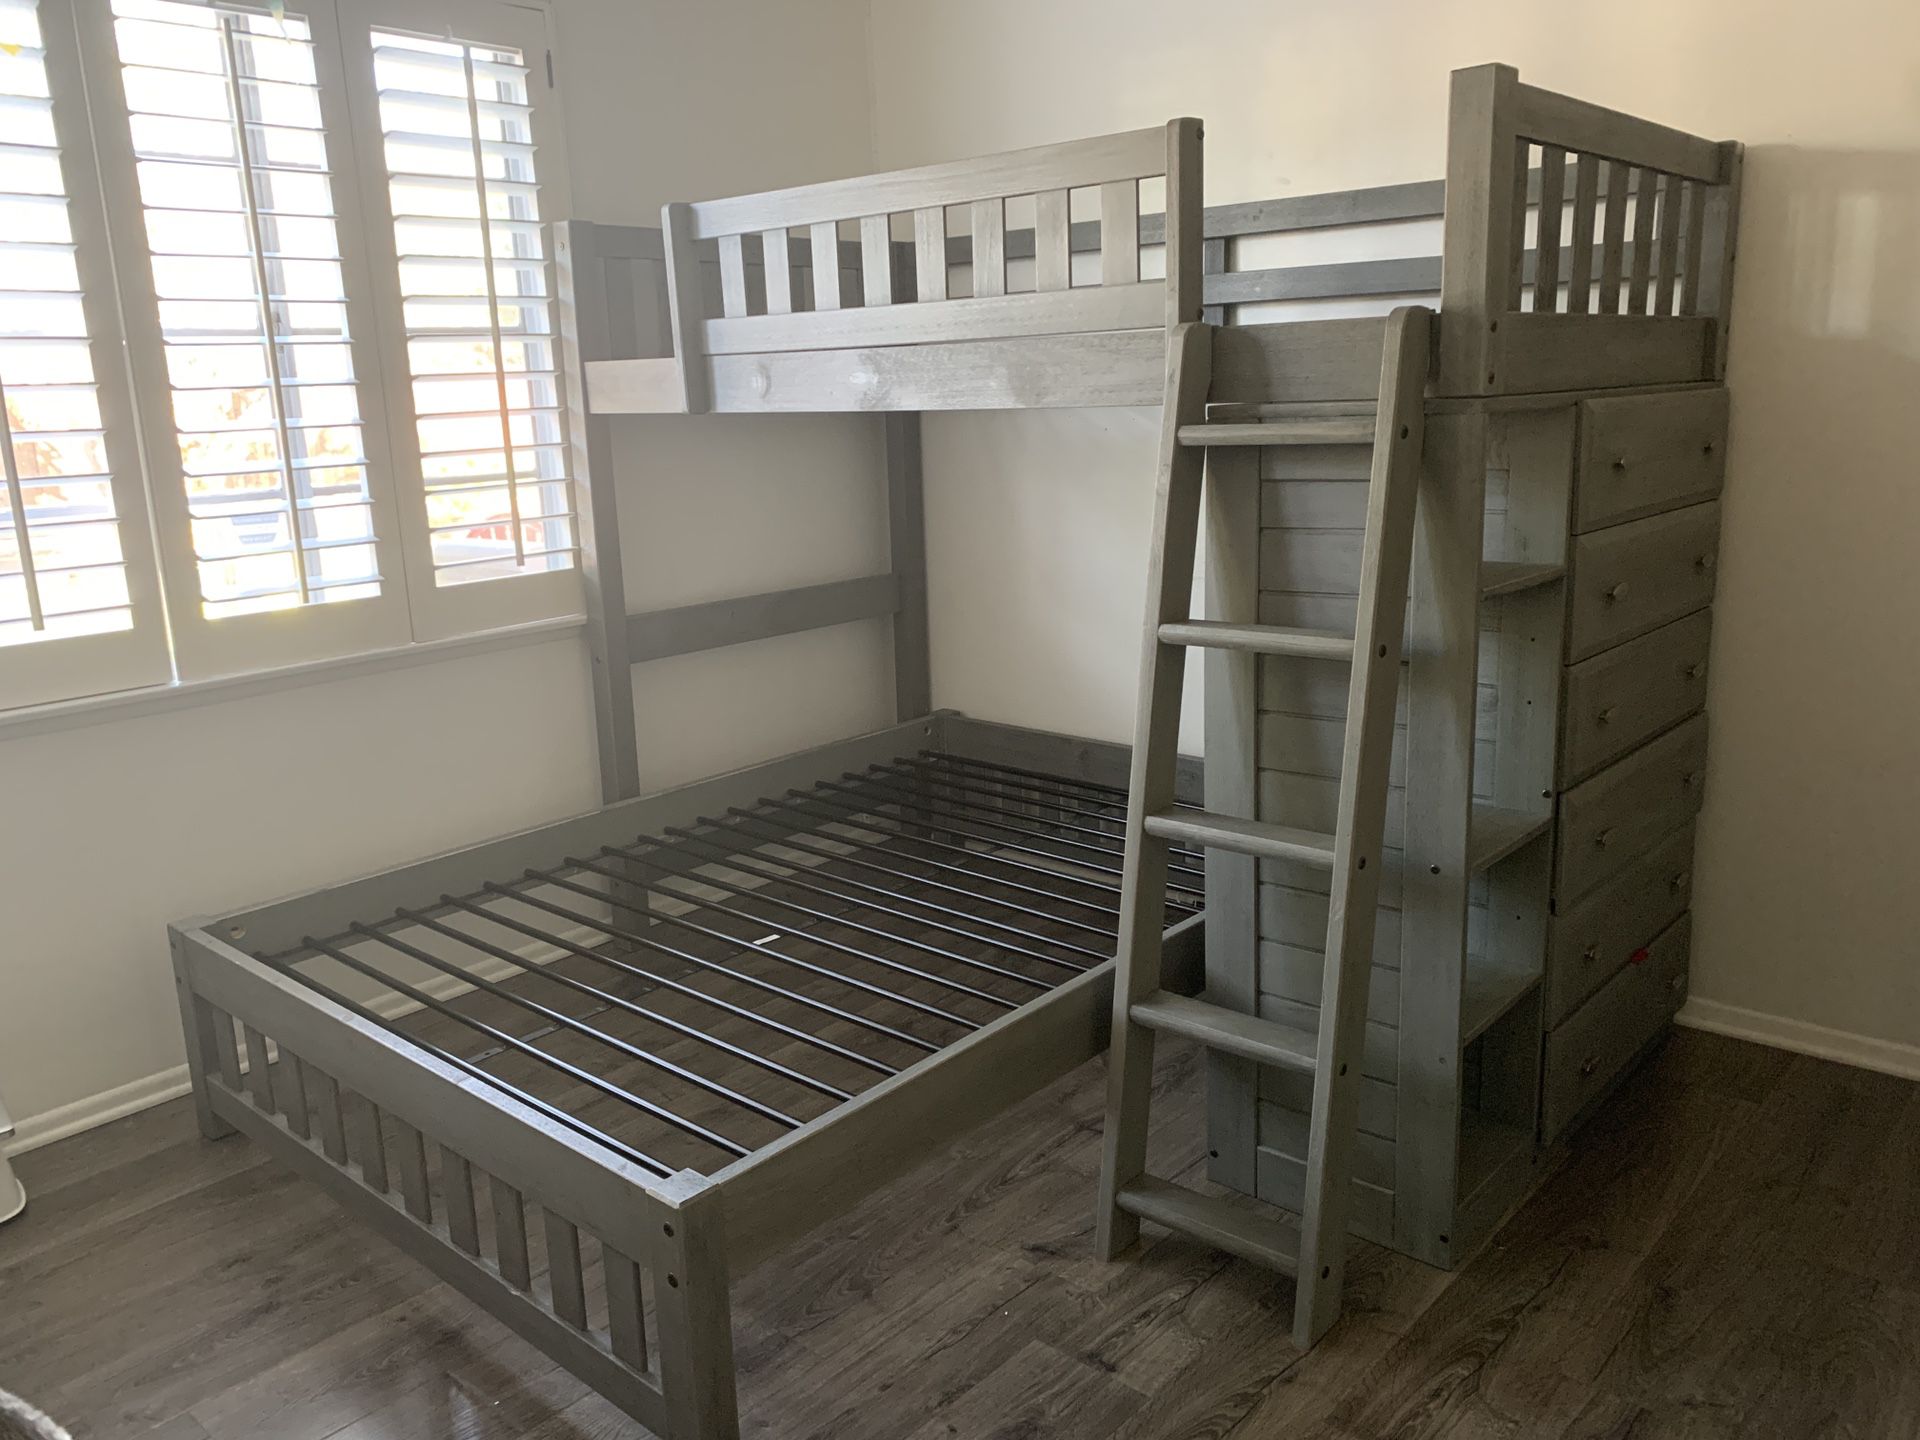 Bunk bed for sale!